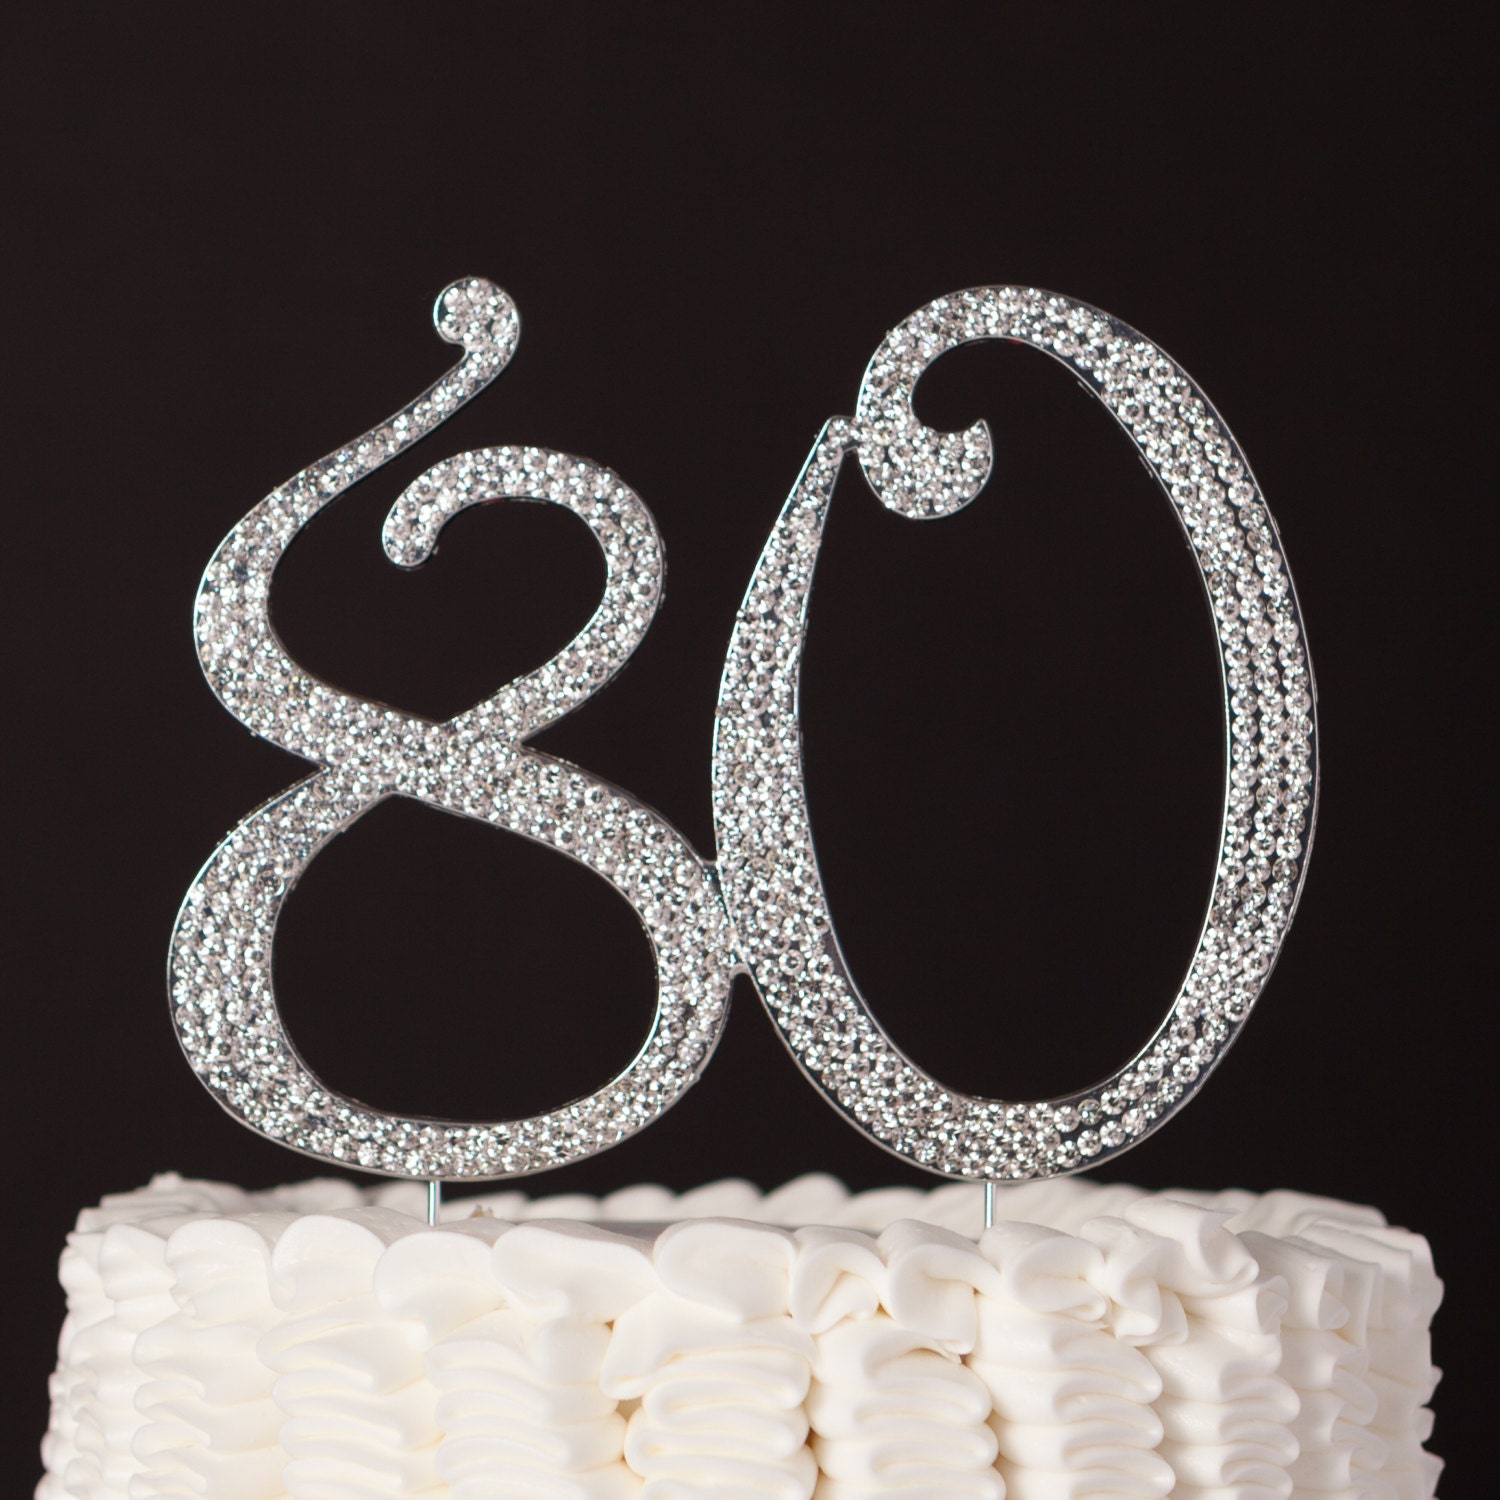 80-cake-topper-80th-birthday-or-anniversary-decorations